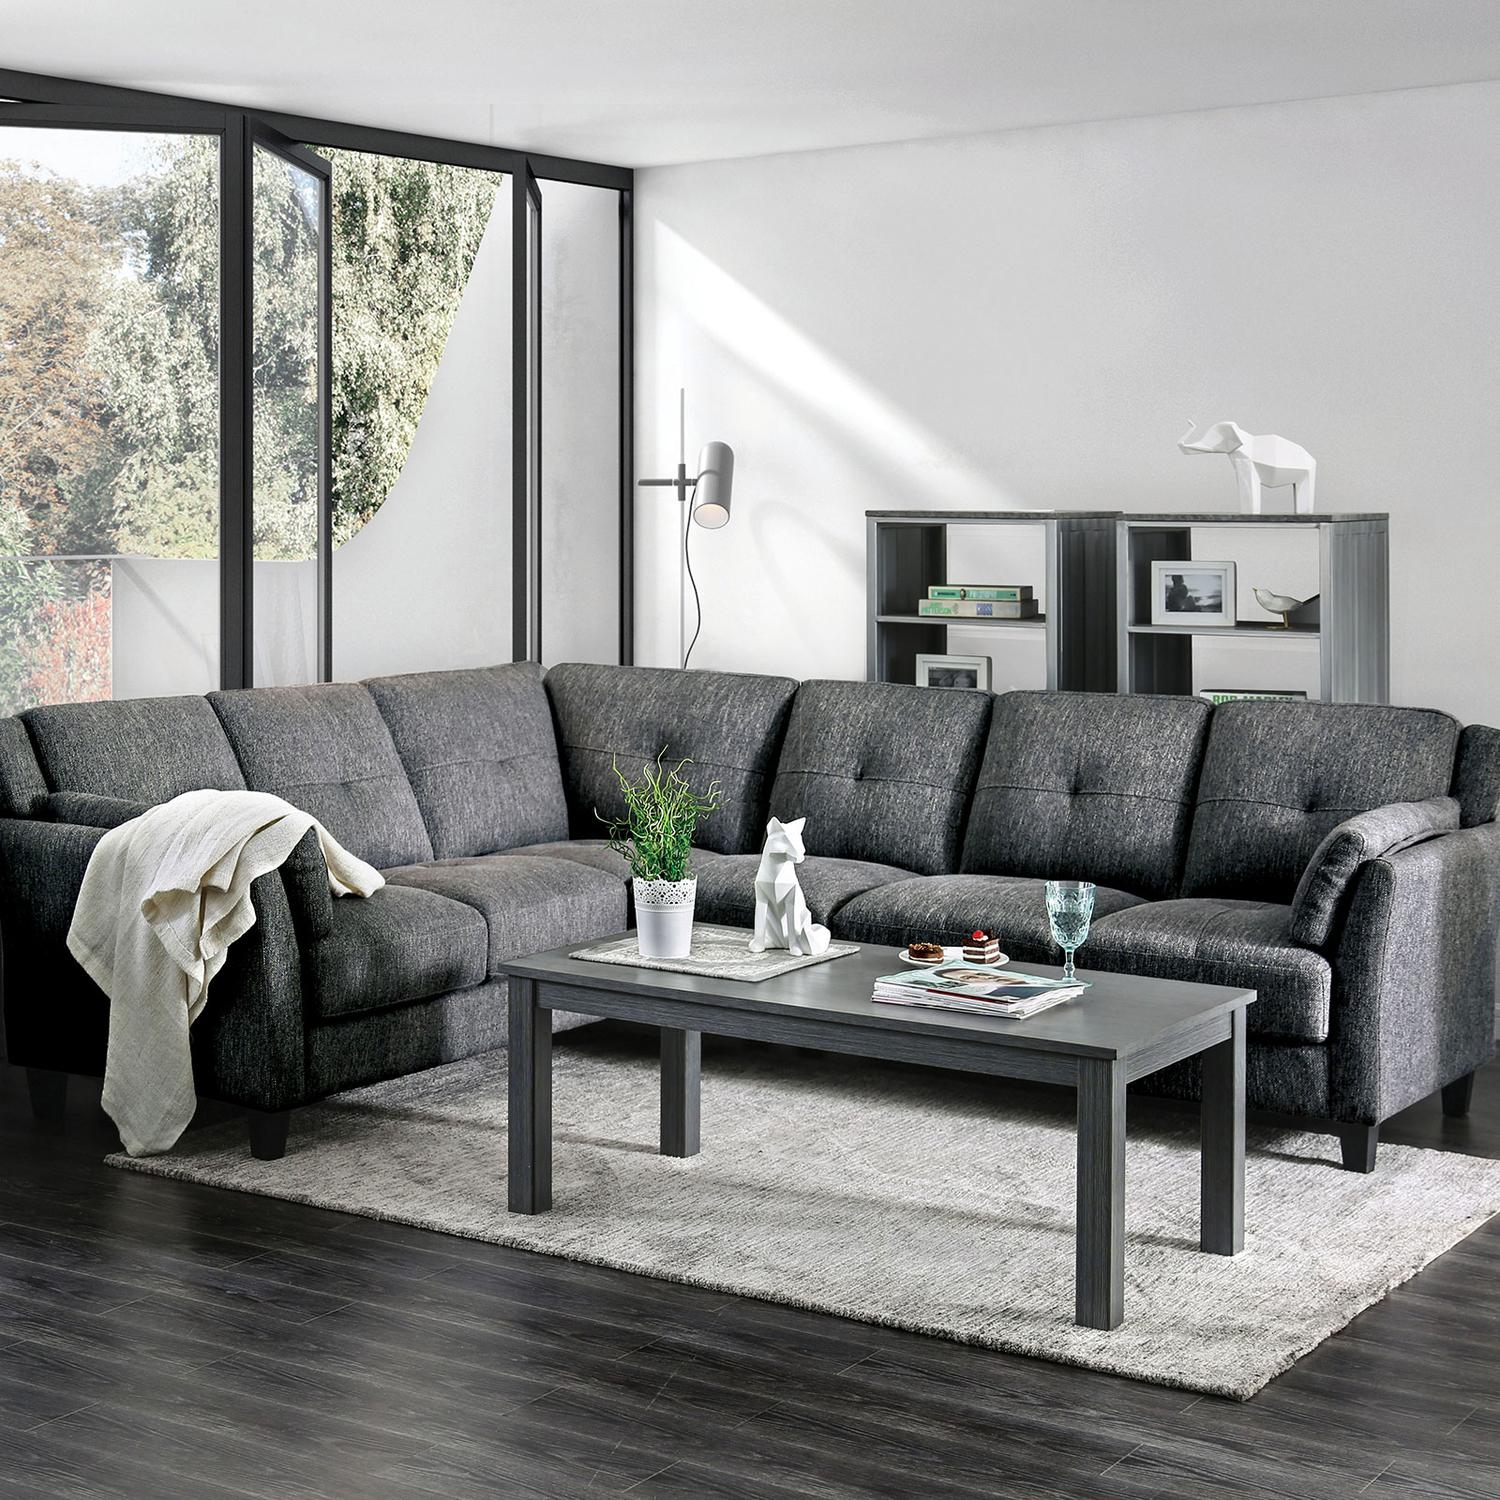 Transitional Sectional Sofa CM6021 Kaleigh CM6021 in Gray 